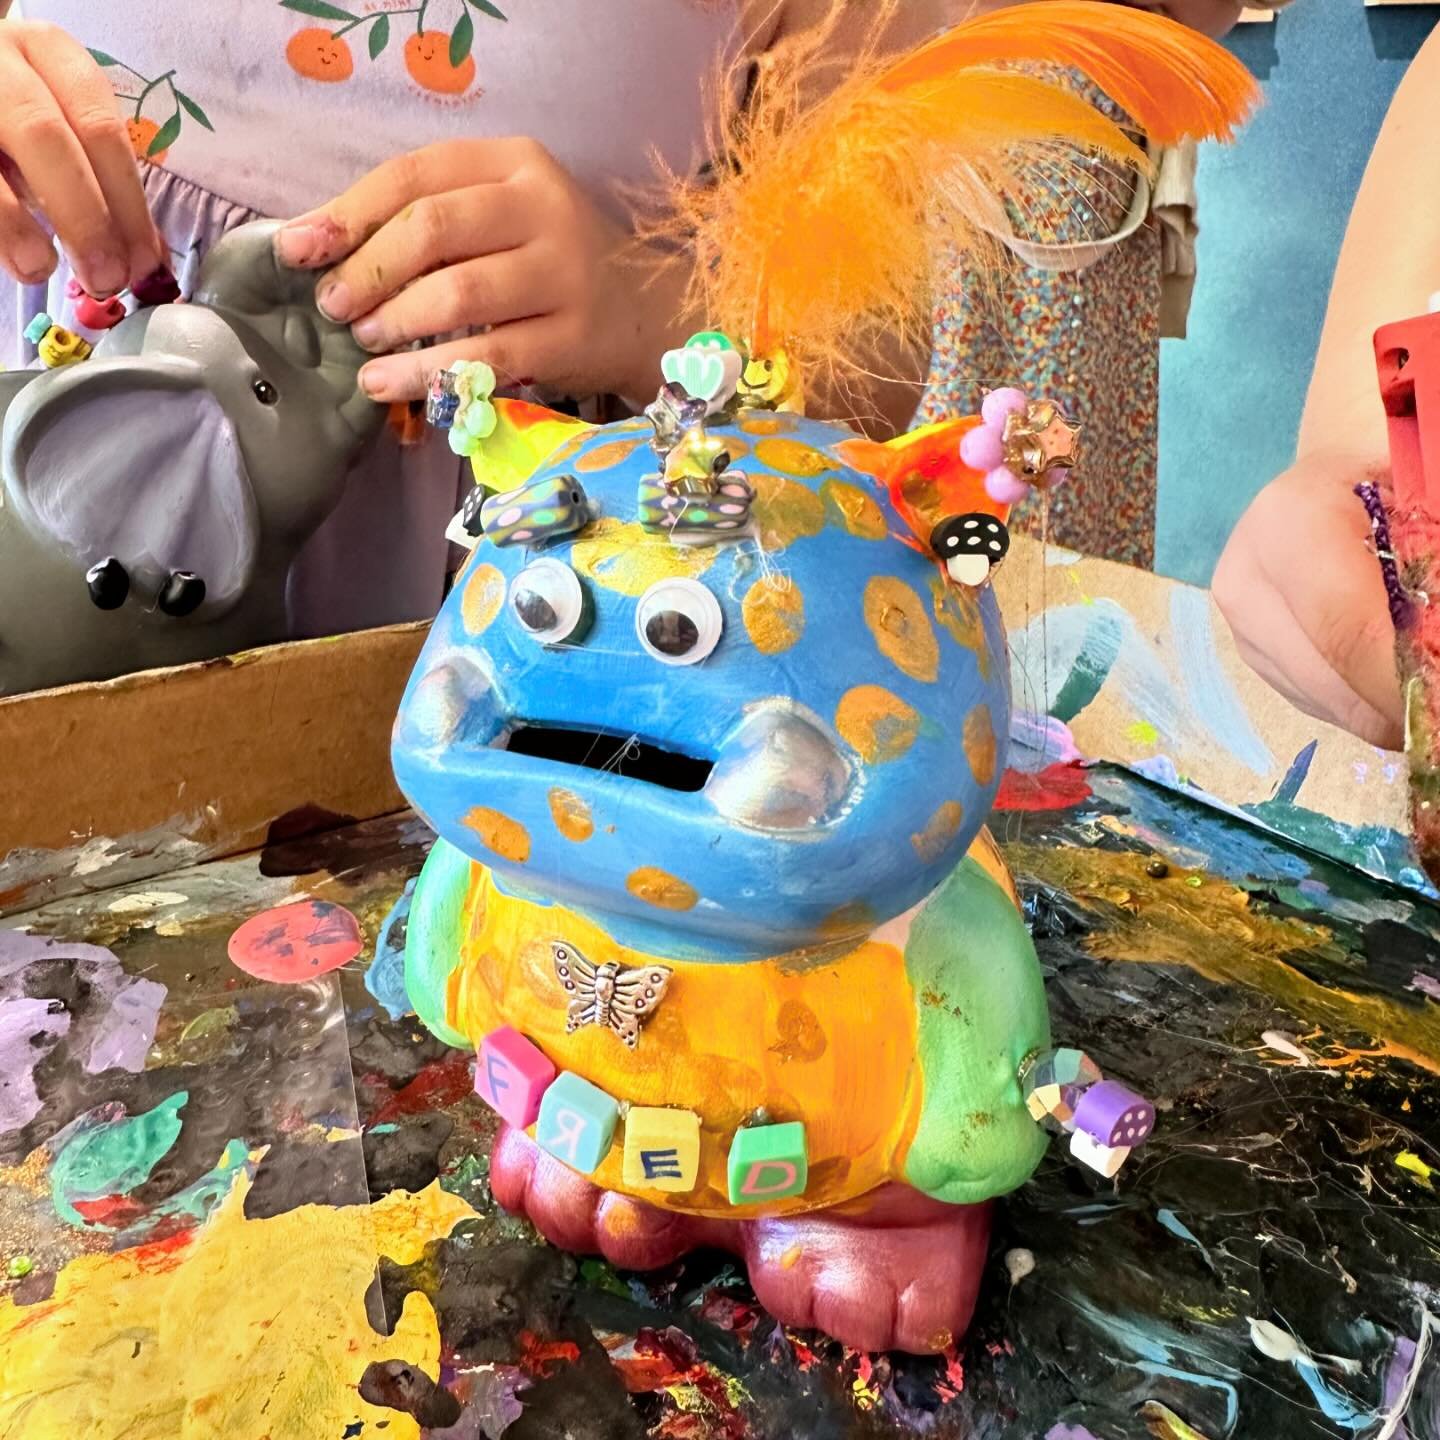 Today was fun!!! 

See you tomorrow for more mind blowing creativity! 
10am-3pm drop in anytime. (Tues,Wed,Sat) 

#studiobloop #innerwestkids #innerwestmums #rozellecreativespace #creativespace #balmain #rozelle #creationstation #beading #airdryingsl